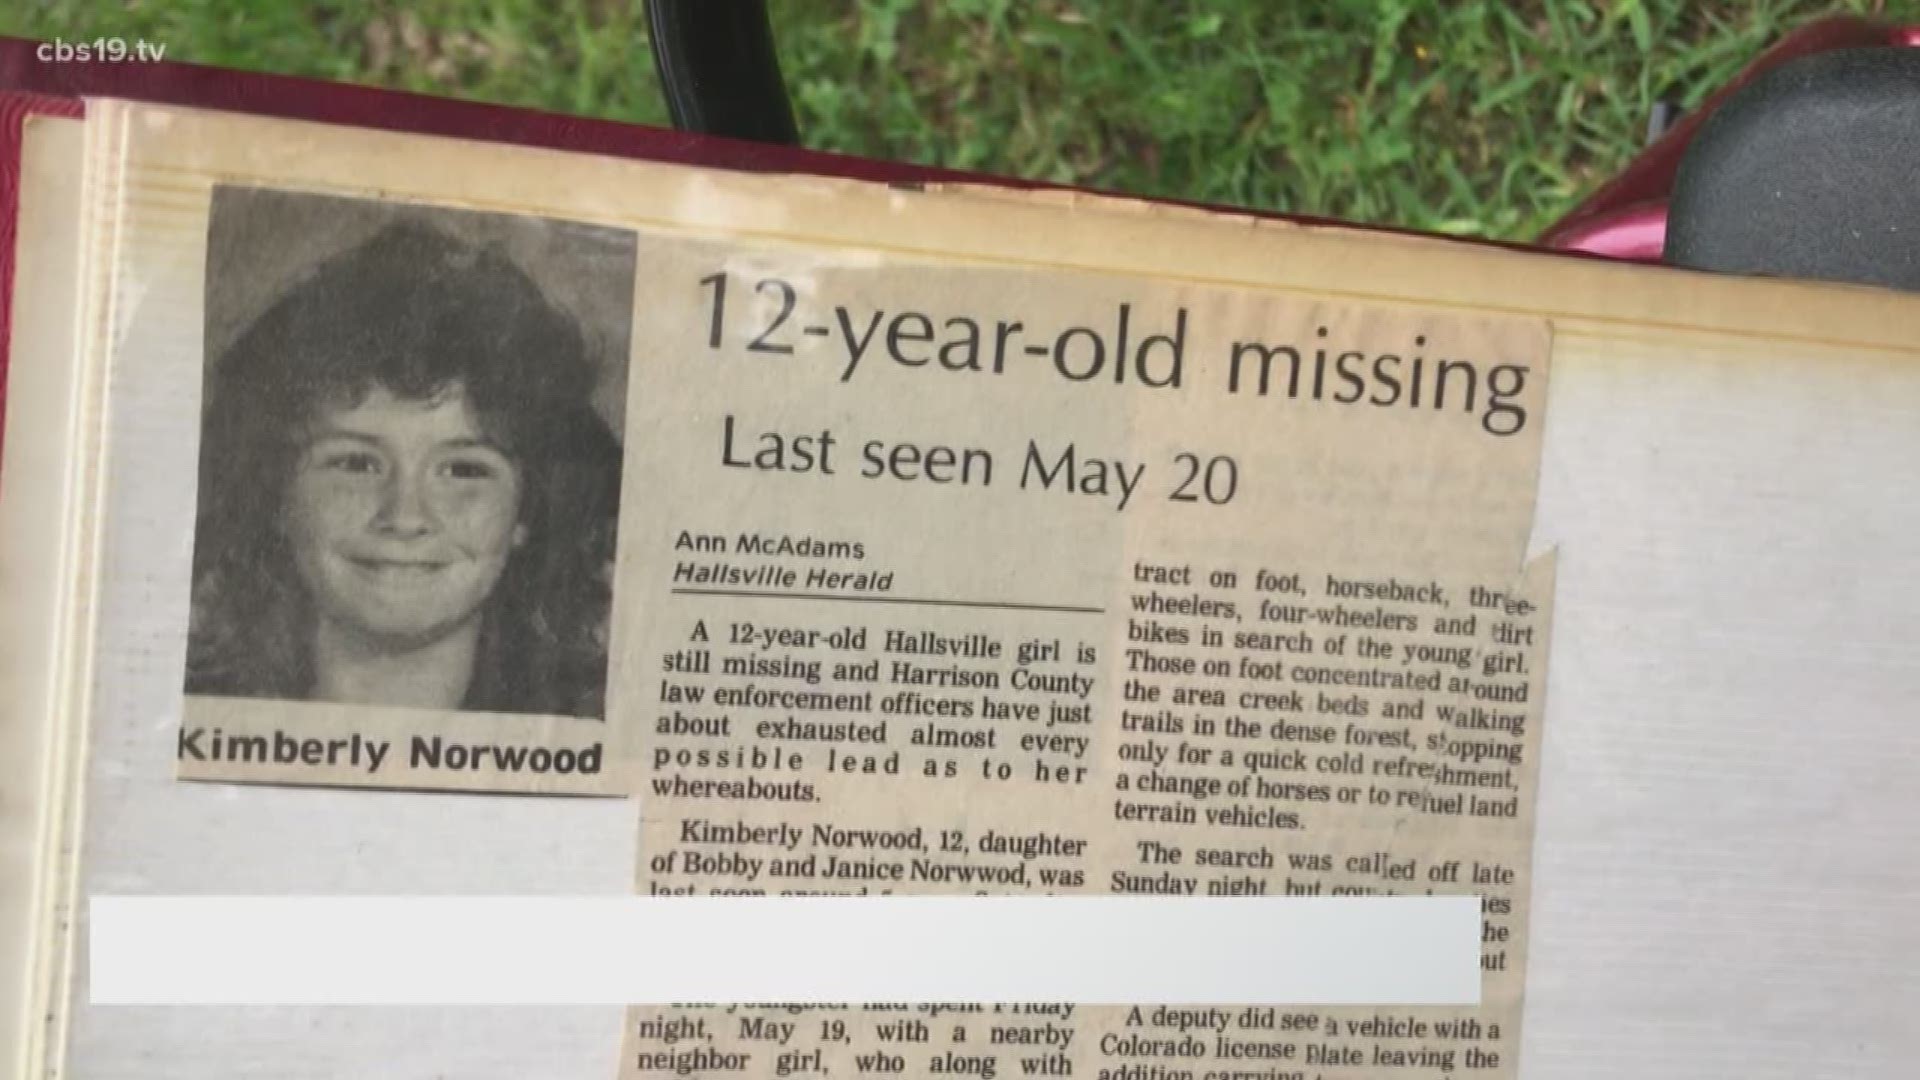 It's been three decades since 12 year old girl Kimberly Norwood disappeared near her home in Hallsville.
30 years later her family is still left with no answers.
CBS 19 takes a closer look into the case that still remains unsolved.